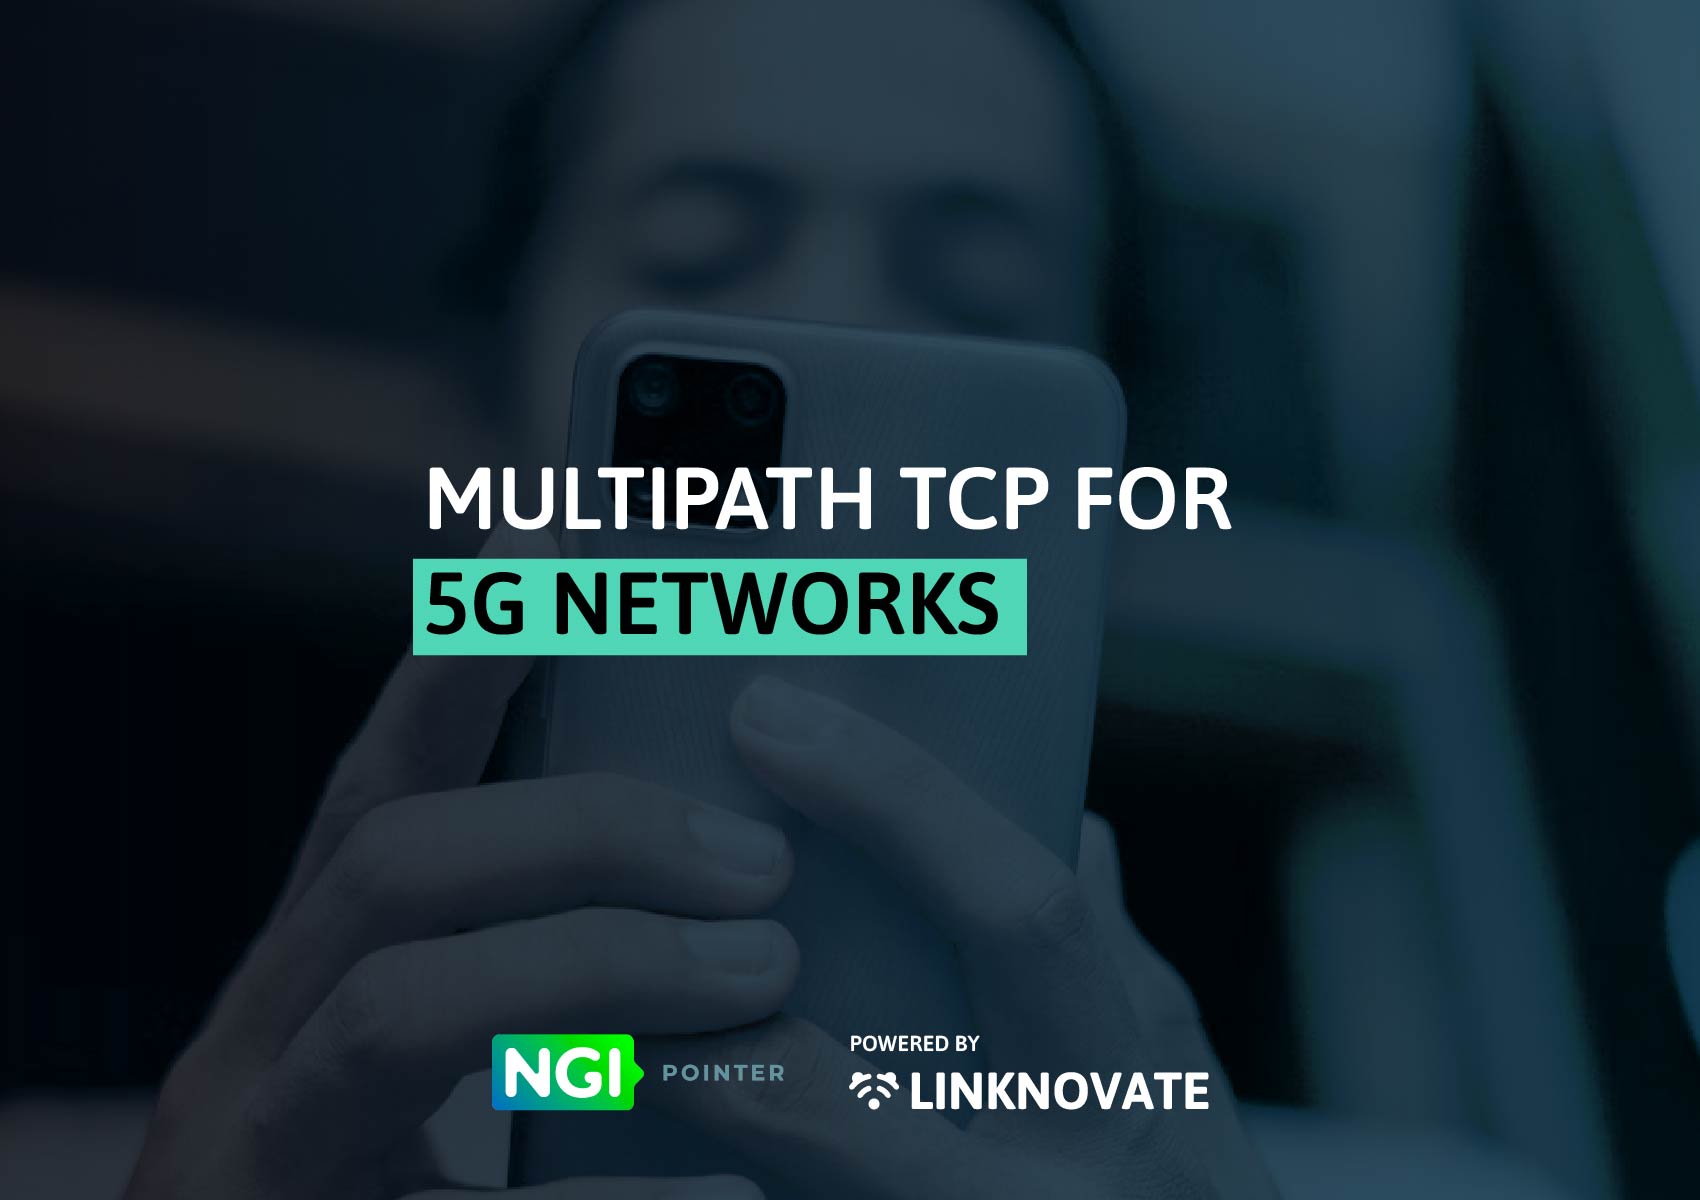 Multipath TCP for 5G Networks